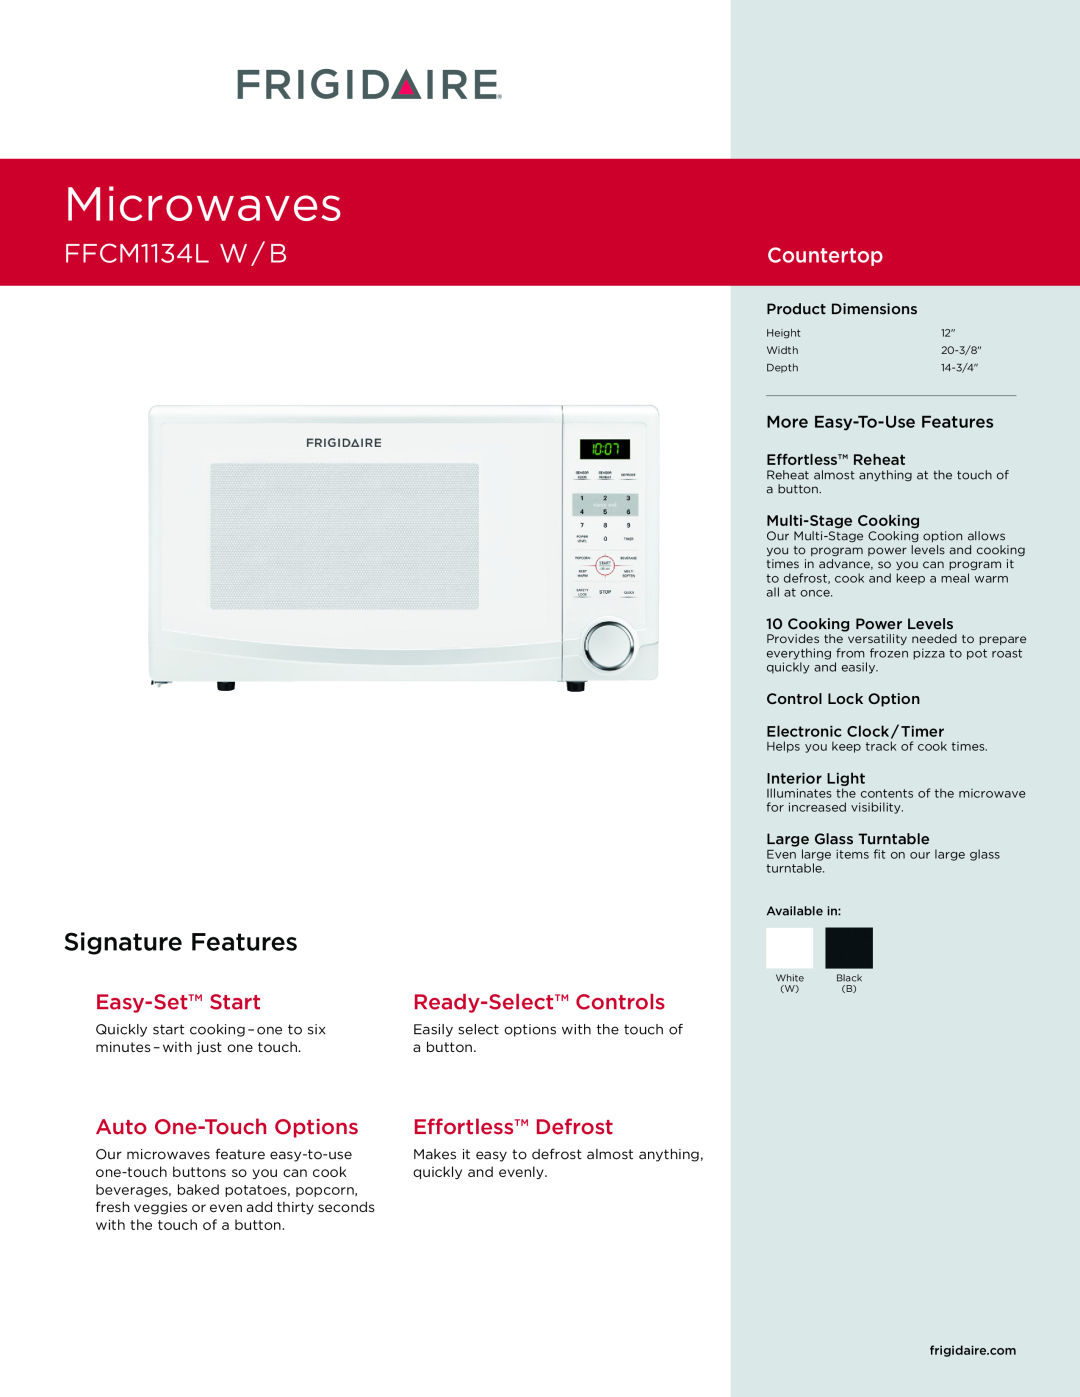 Frigidaire dimensions Microwaves, FFCM1134L W / B, Signature Features, Countertop, Easy-SetStart, Auto One-TouchOptions 